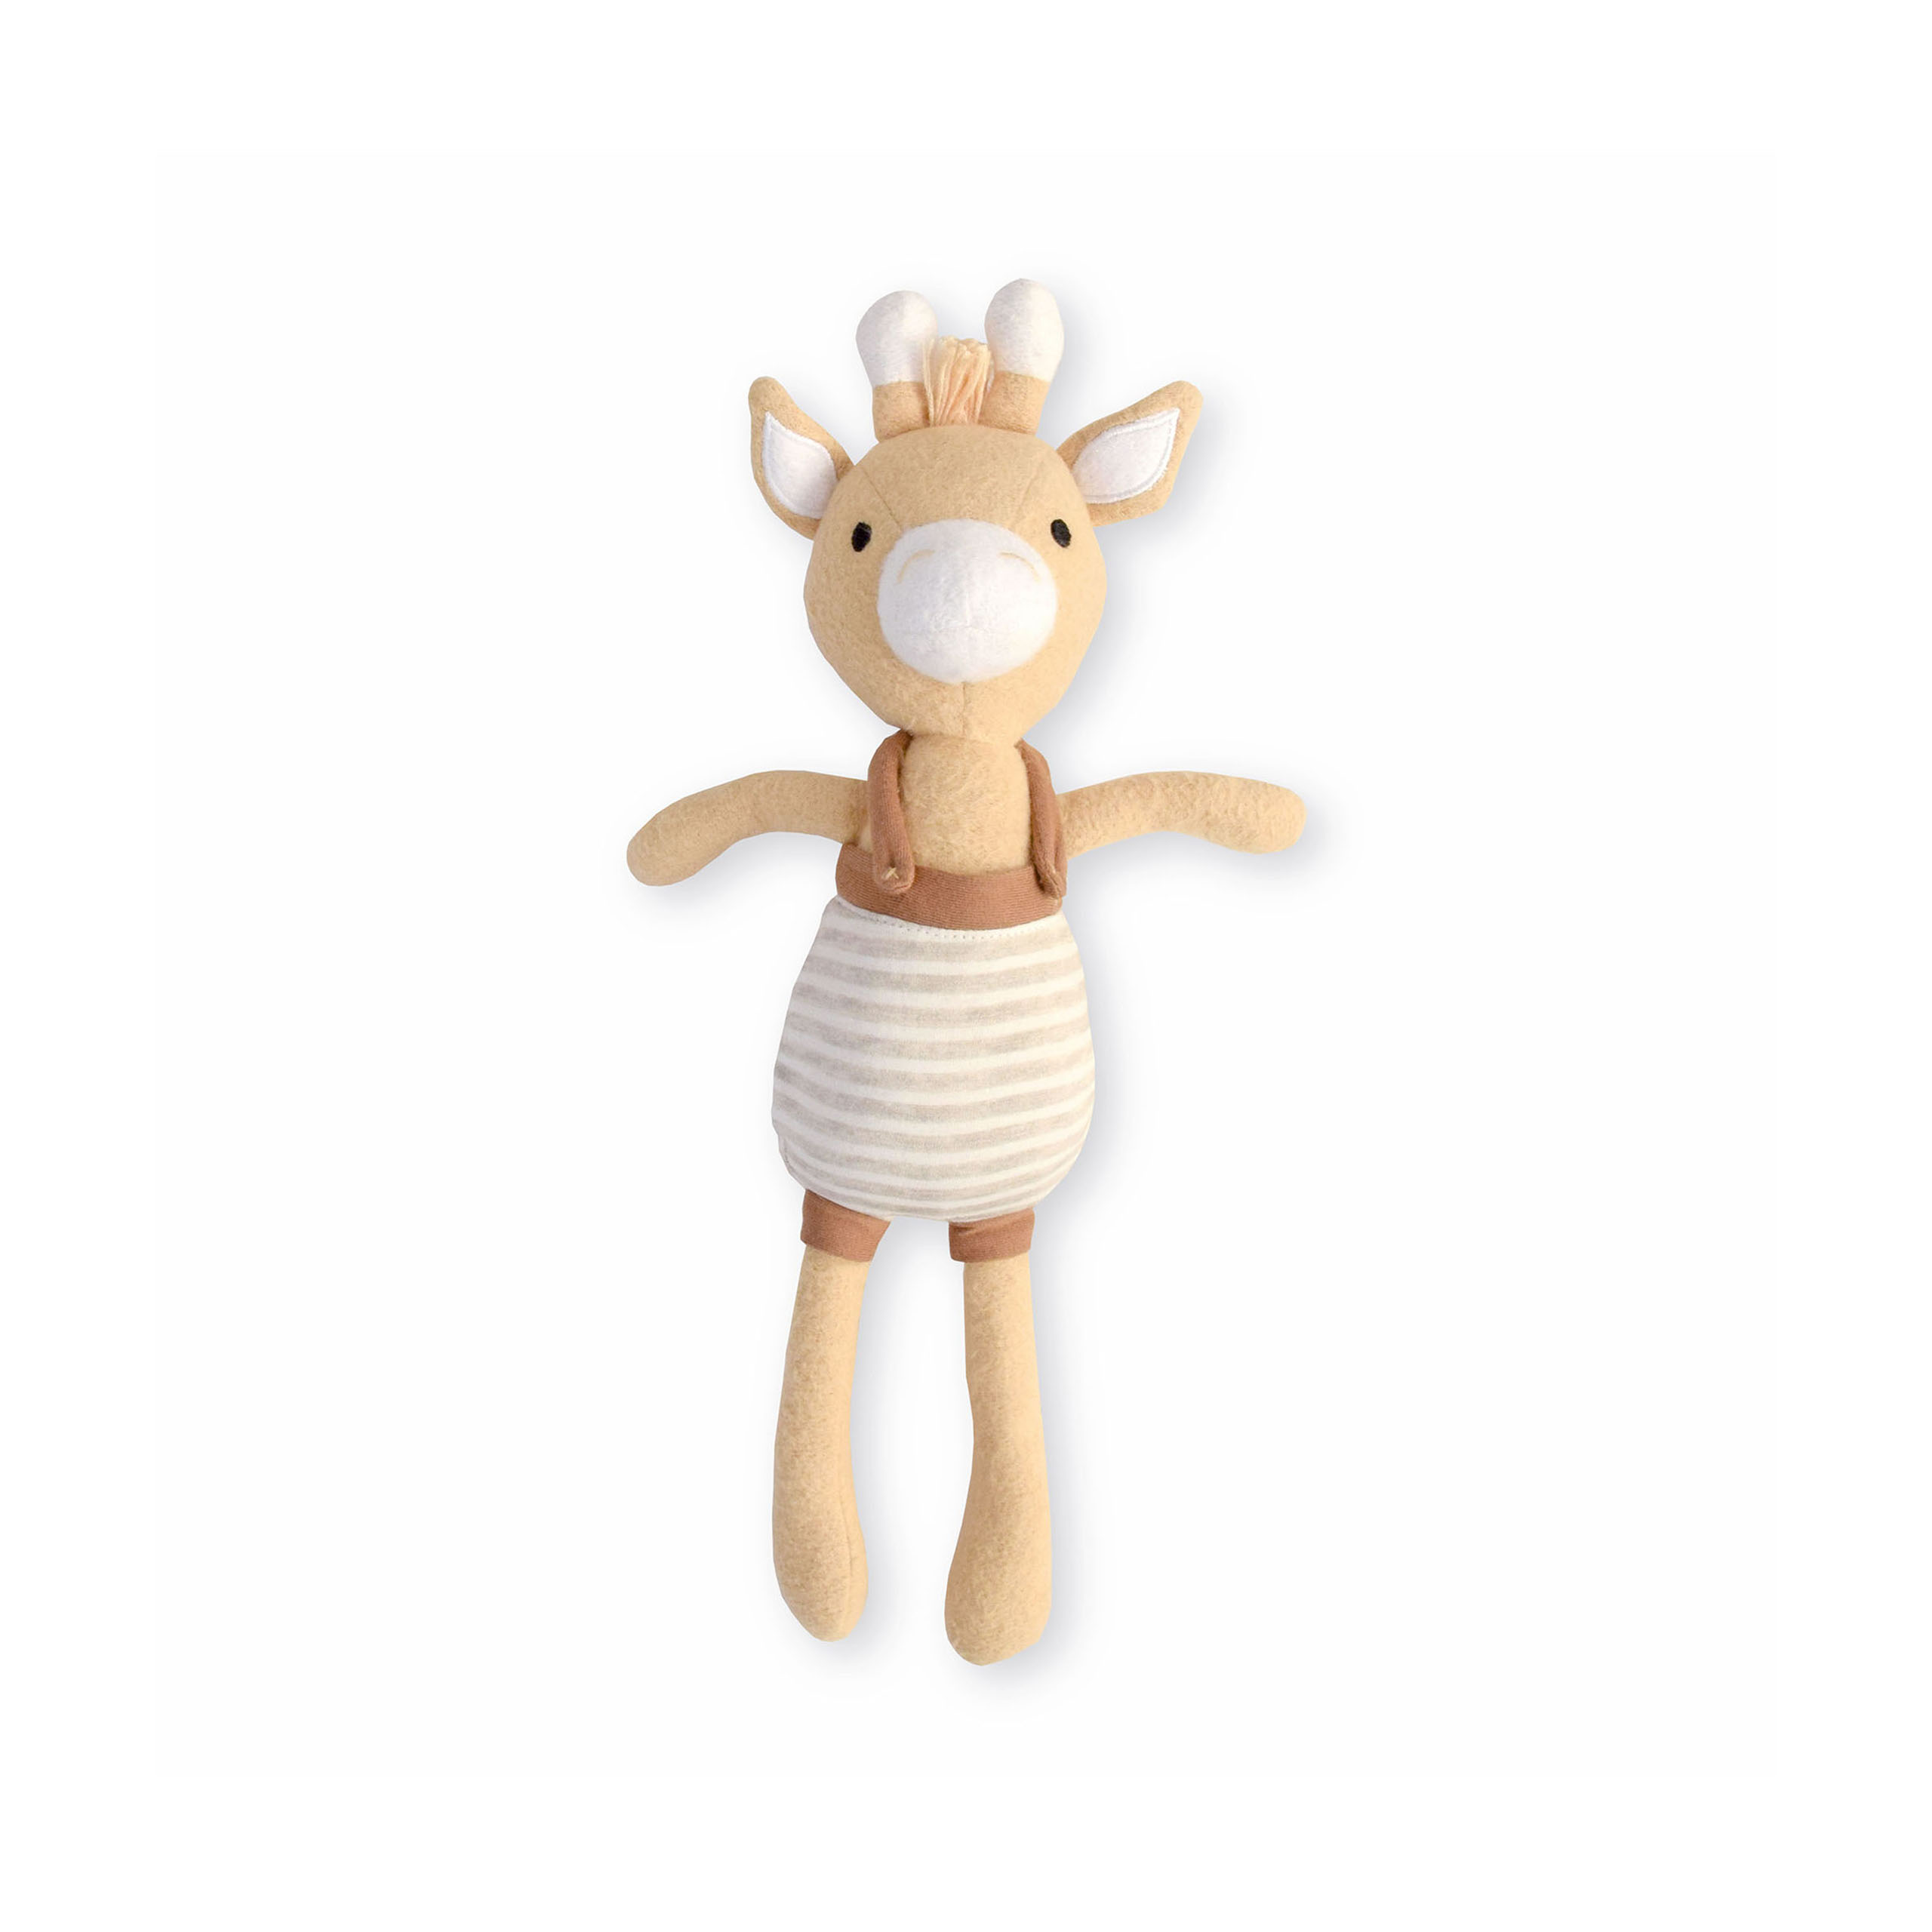 Image of a beige giraffe plush toy on a white background